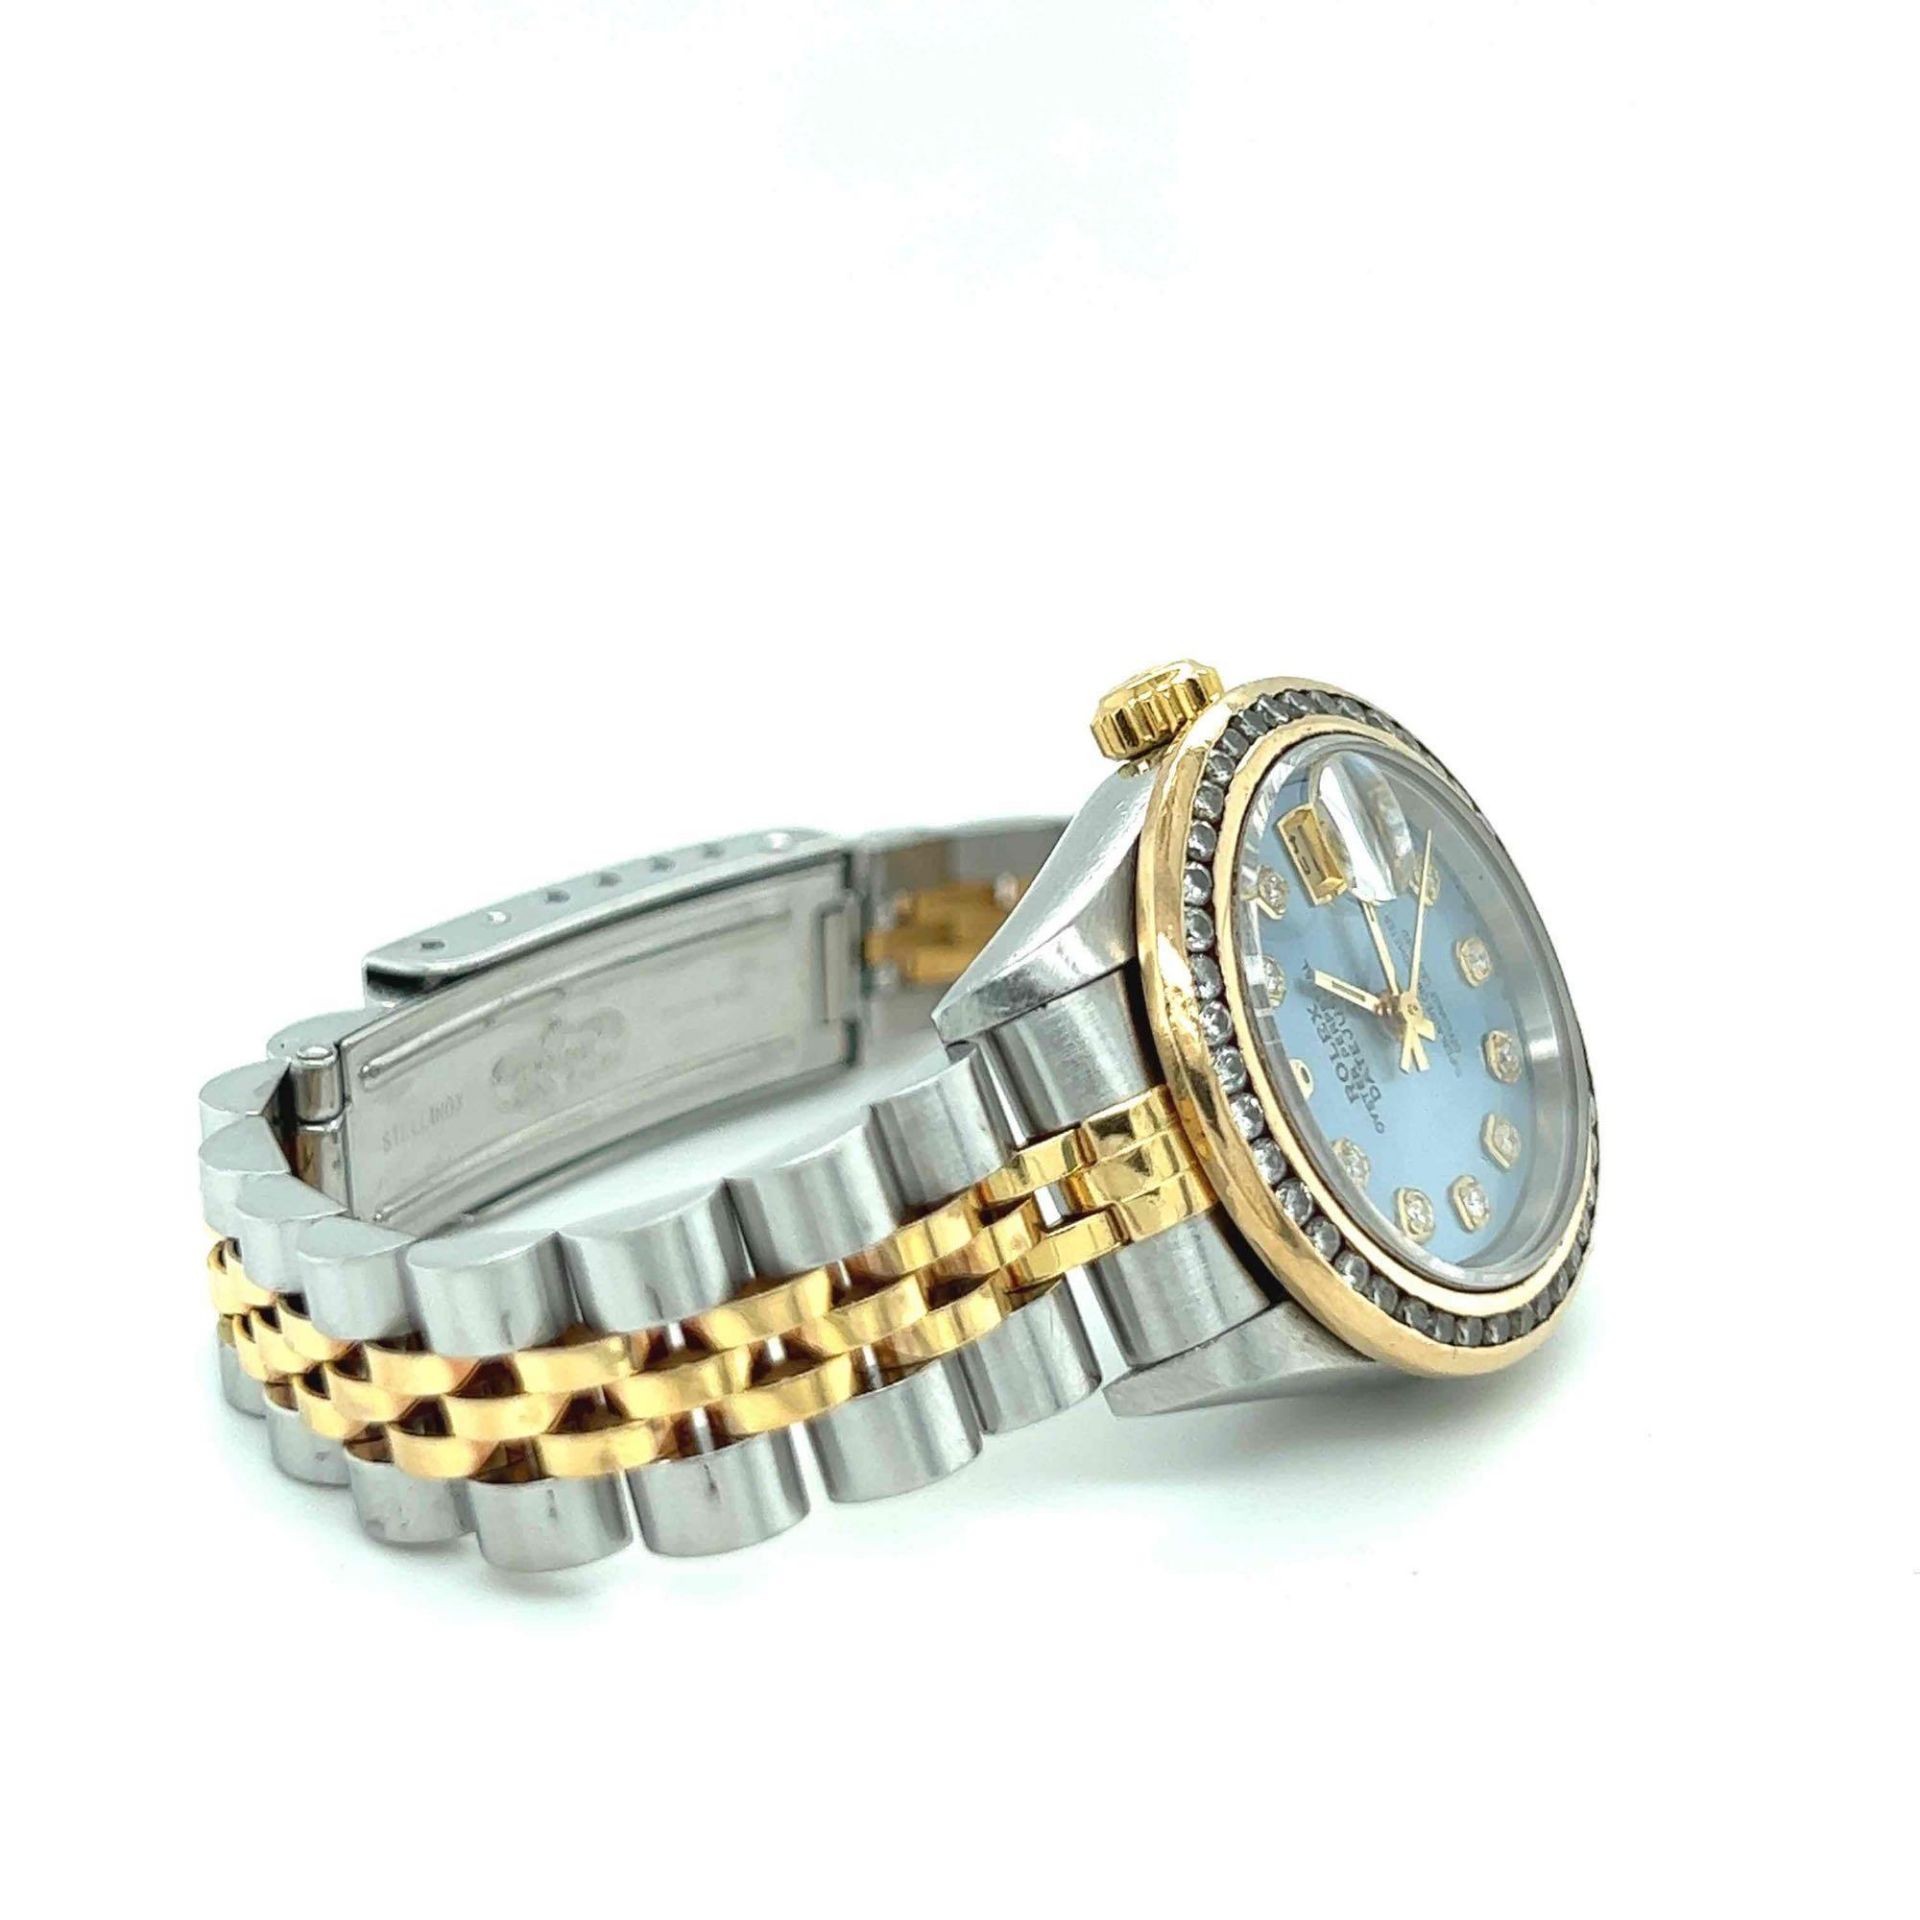 PREOWNED ROLEX LADY DATEJUST 18k GOLD AND STAINLESS STEEL. DIAMONDS. - Image 4 of 5